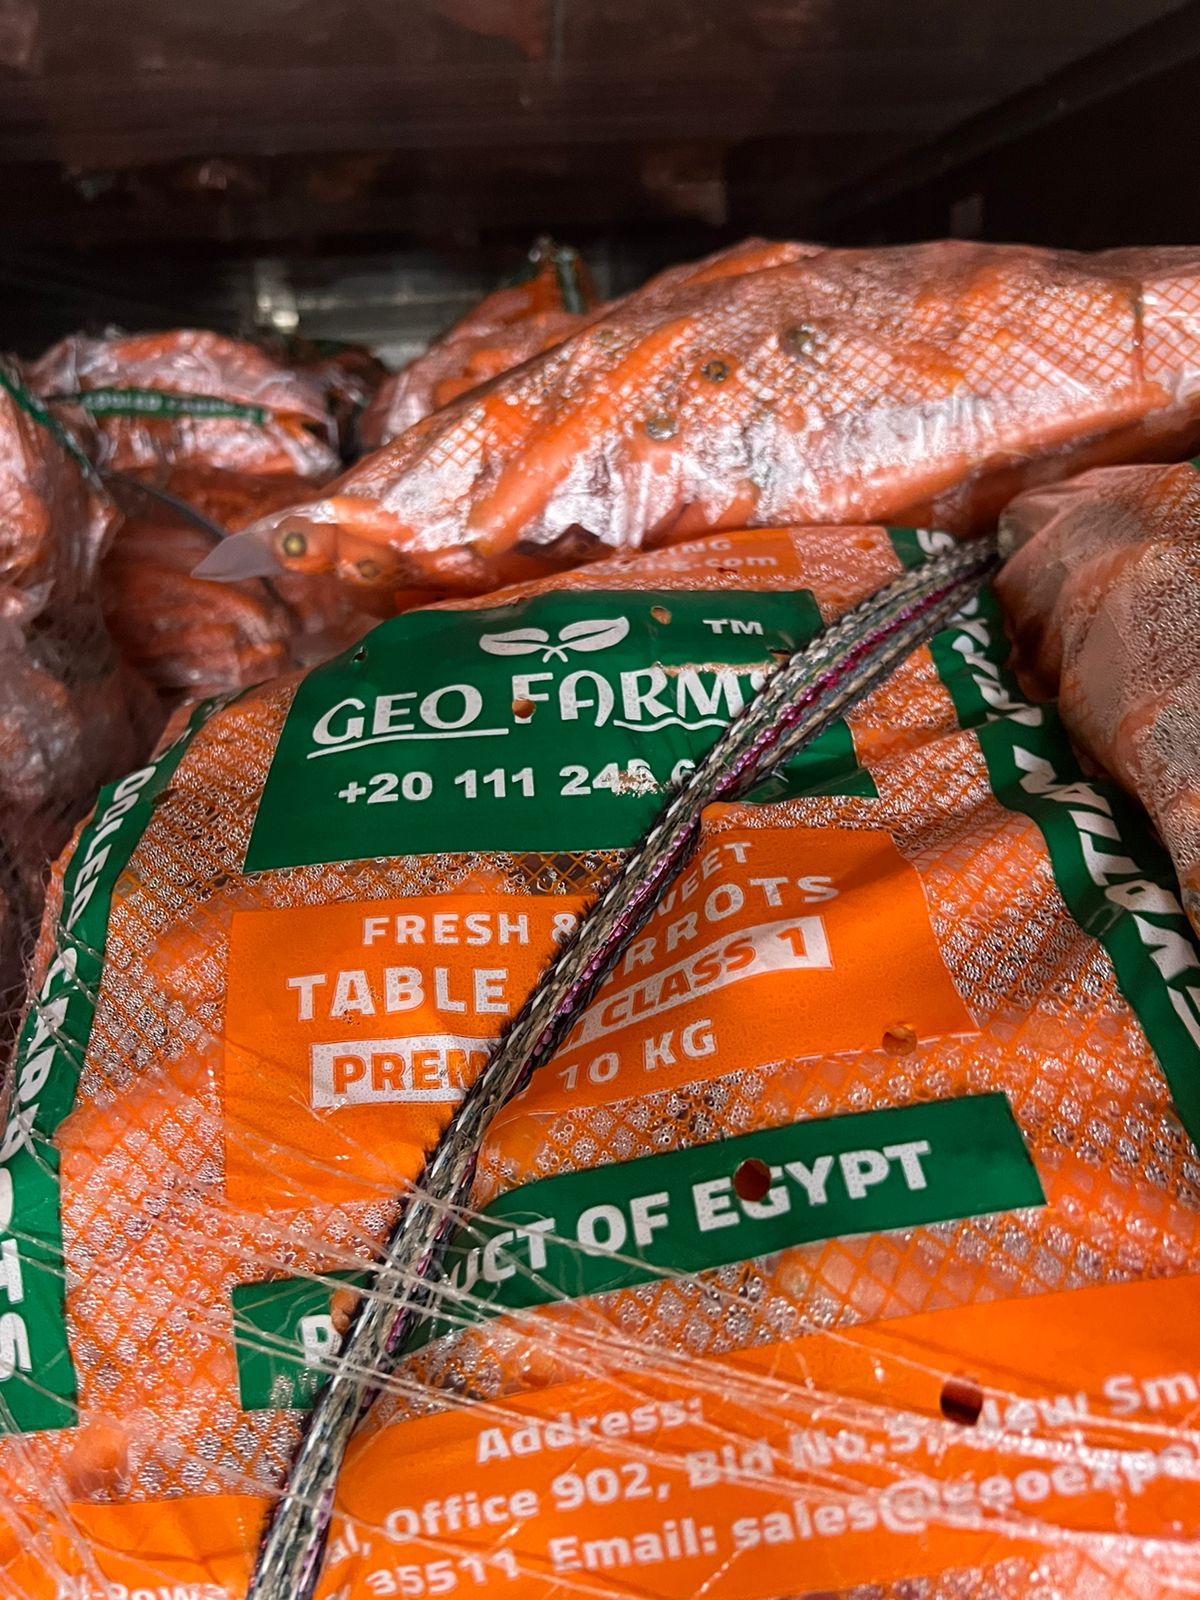 Top carrot grower in egypt